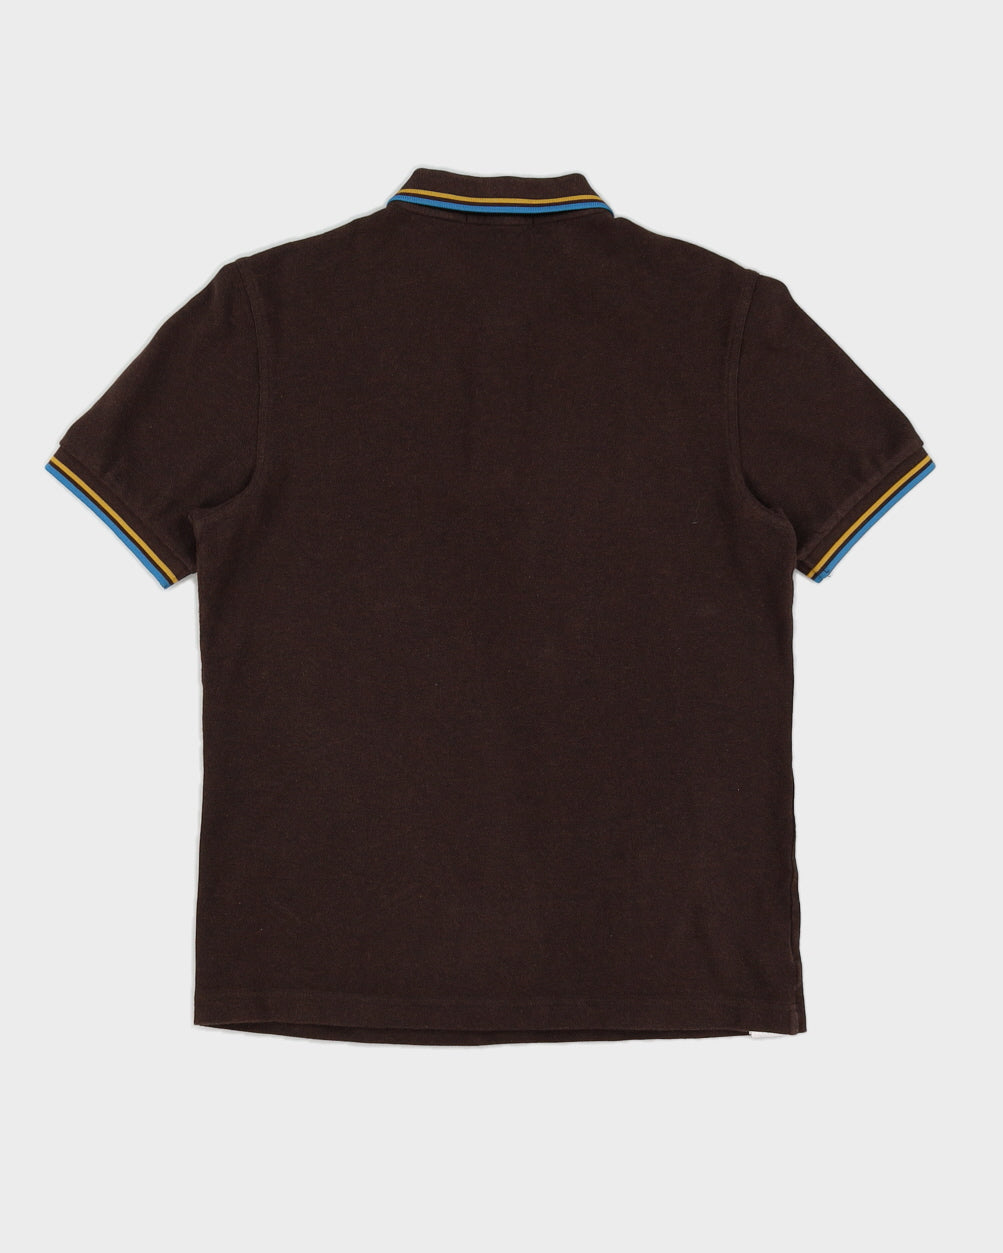 Brown Fred Perry Polo Shirt - M